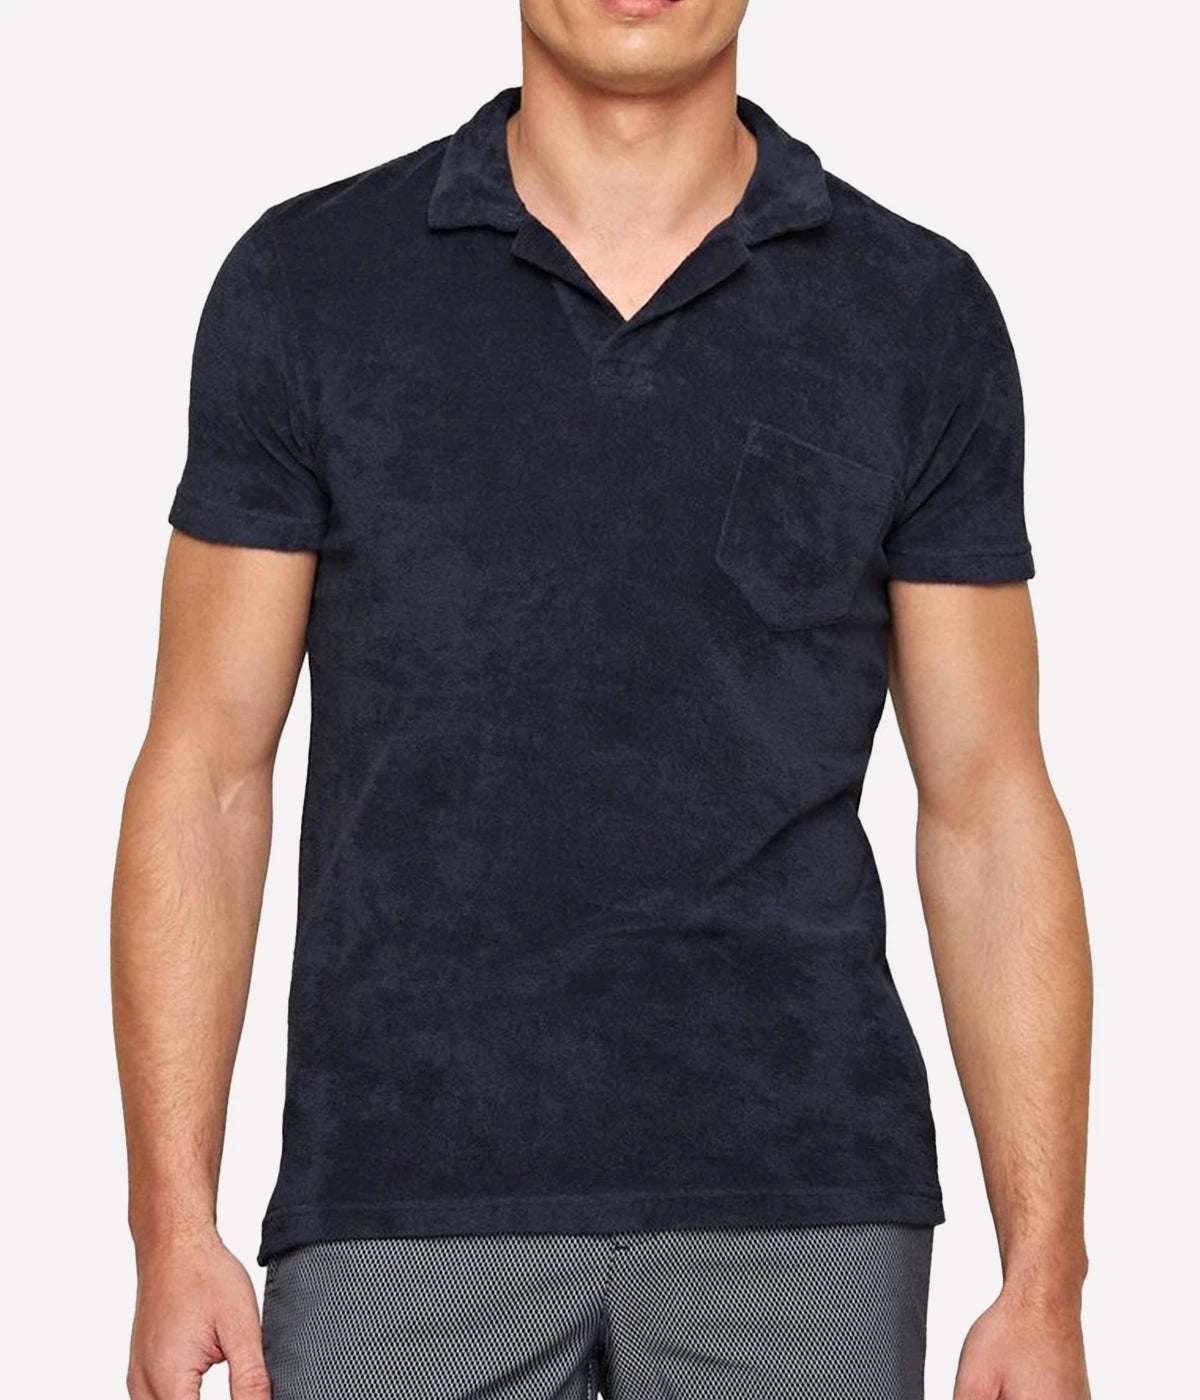 Terry Towelling Shirt in Navy